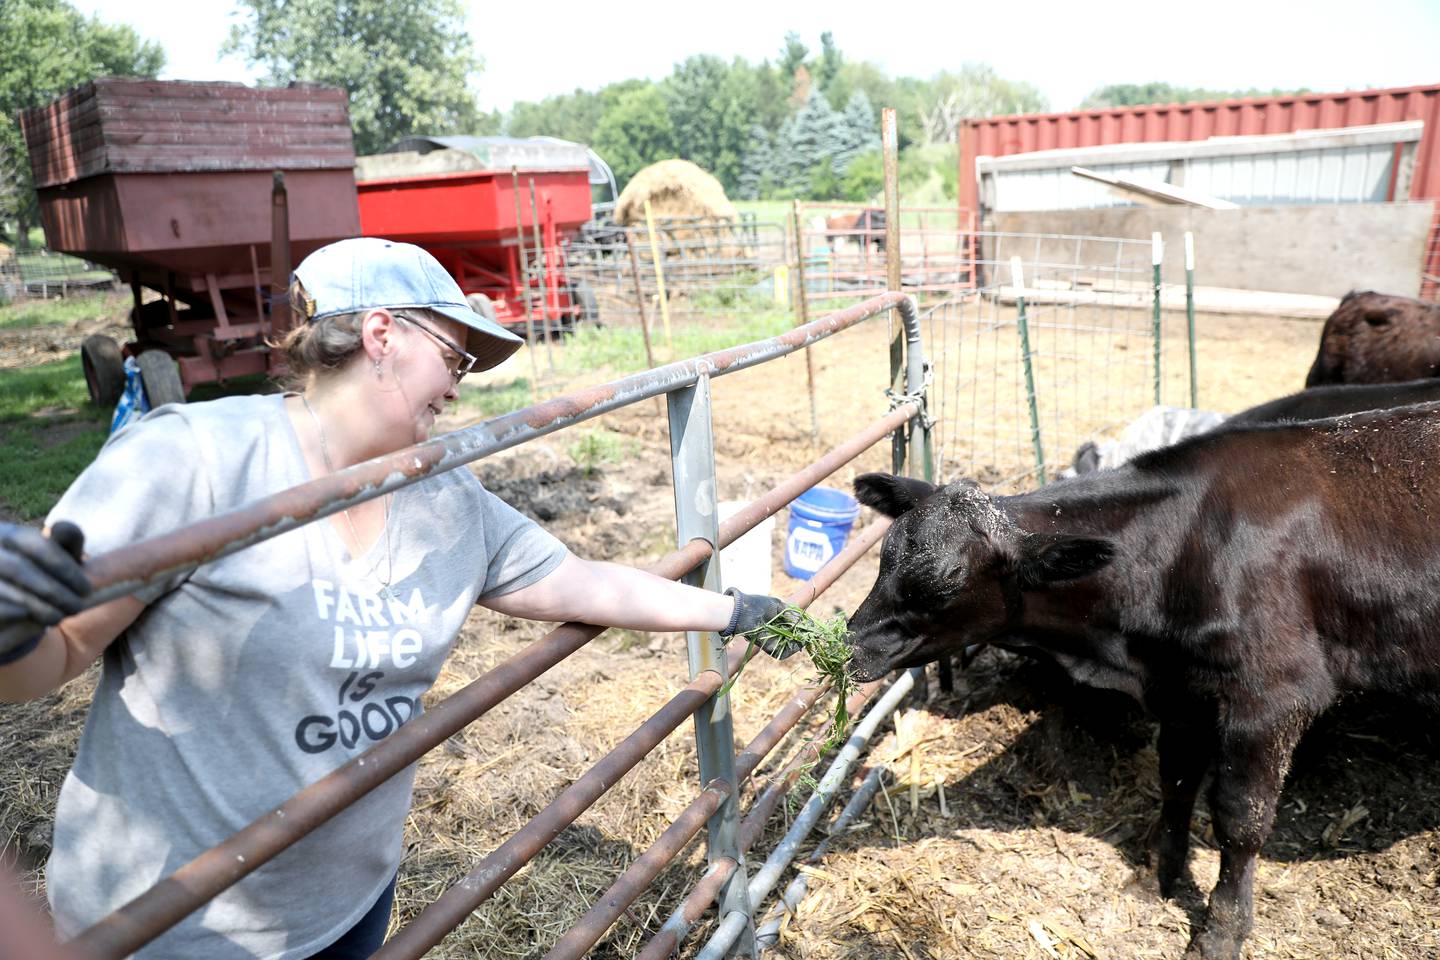 Marcia Burgin gives some grass to one of the calves on the farm she runs with her husband, Bob Burgin. Bob and Marcia Burgin’s six calves escaped out of a fence at their Maple Park farm on July 2, 2023. Two of the calves were recovered that night while the other four were caught over the course of three days by cowboy Wesley Bush of Morrison.